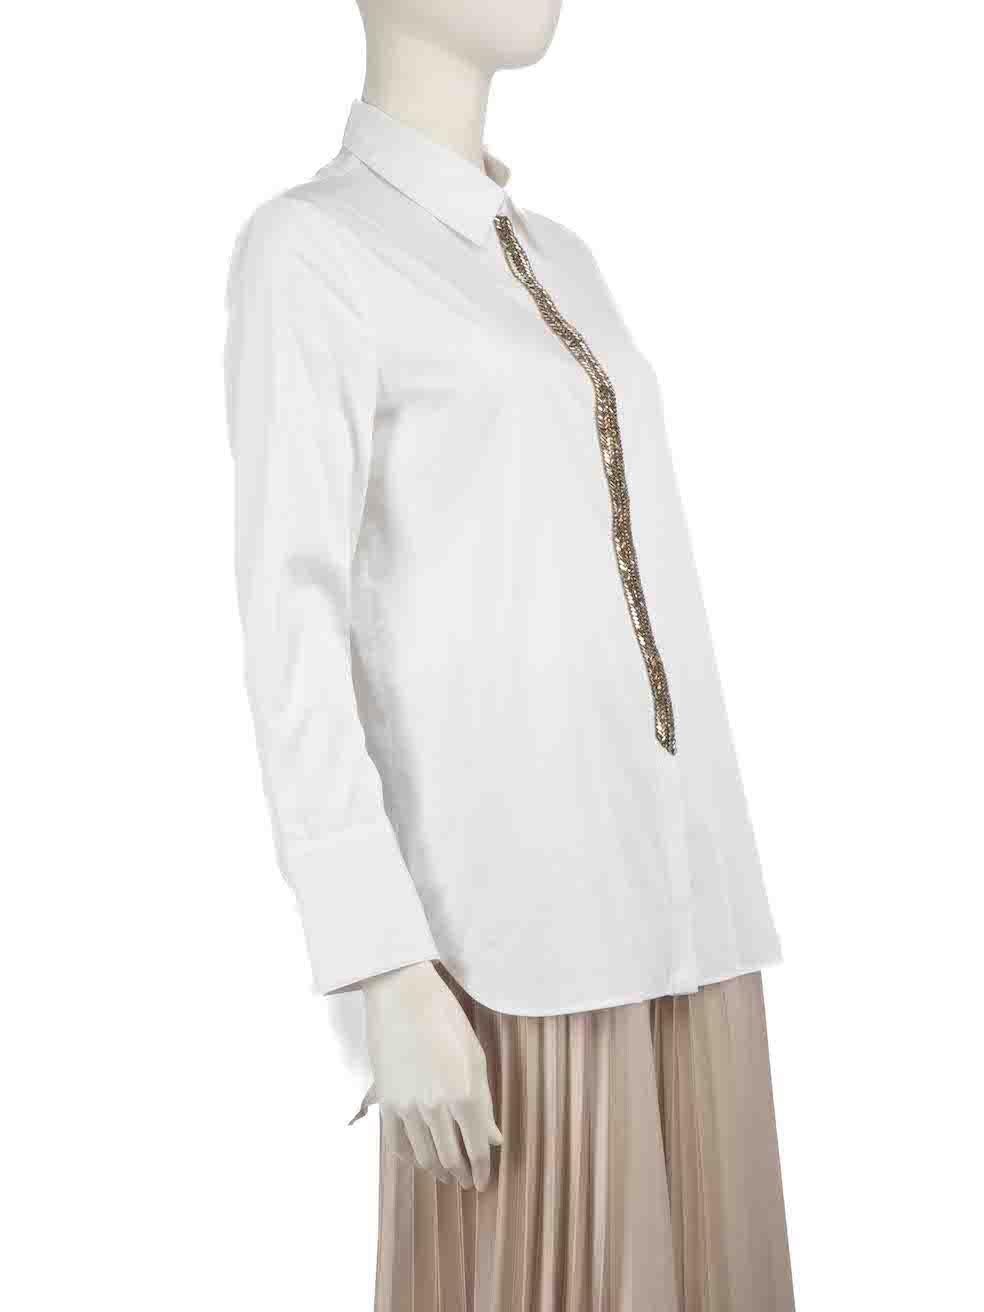 CONDITION is Never worn, with tags. However, discolouration mark to left shoulder is evident due to poor storage on this new Adam Lippes designer resale item.
 
 
 
 Details
 
 
 White
 
 Cotton
 
 Shirt
 
 Long sleeves
 
 Crystal embellished